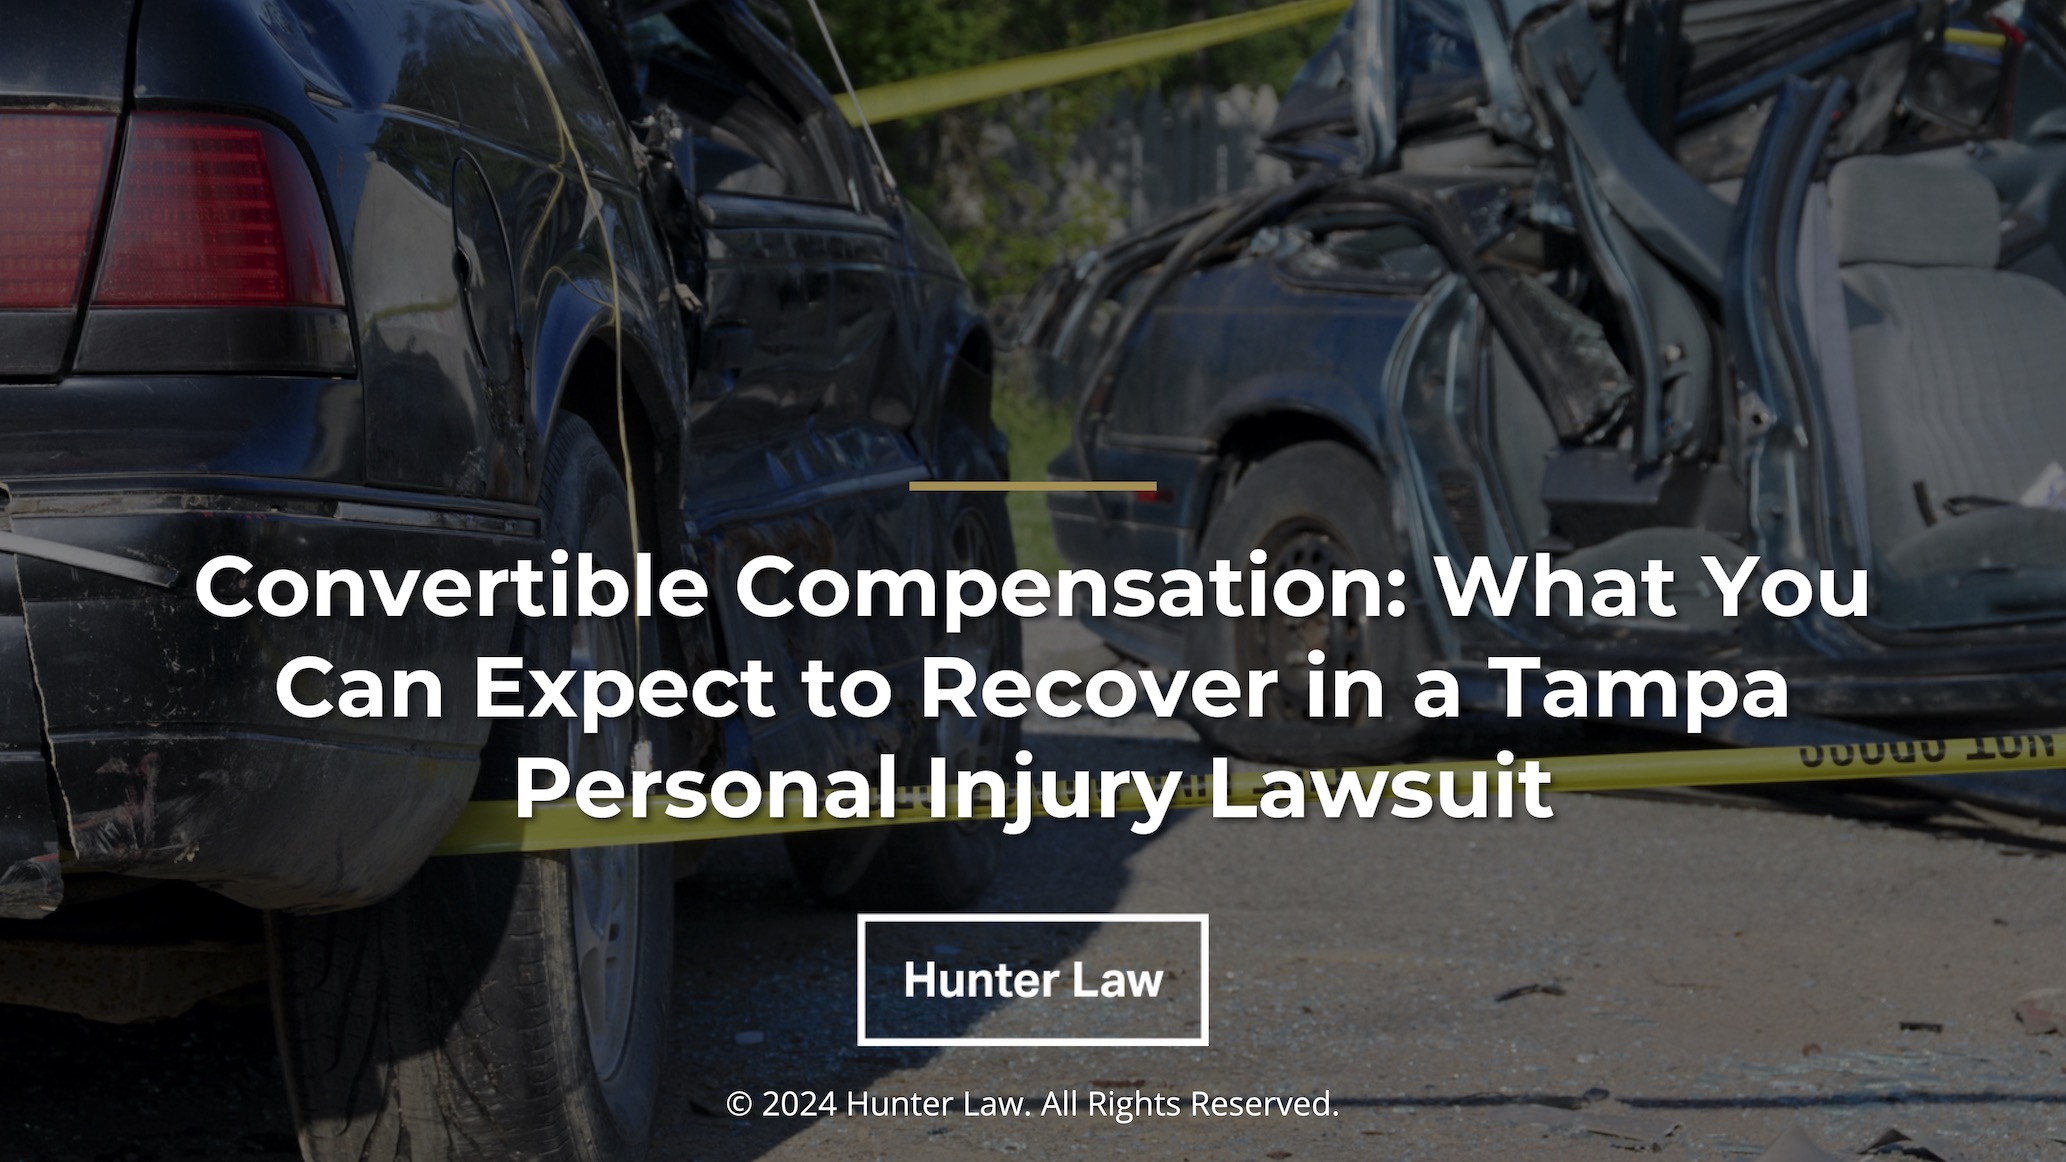 Featured: Two-car crash- Convertible compensation: what you can expect to recover in a Tampa personal injury lawsuit